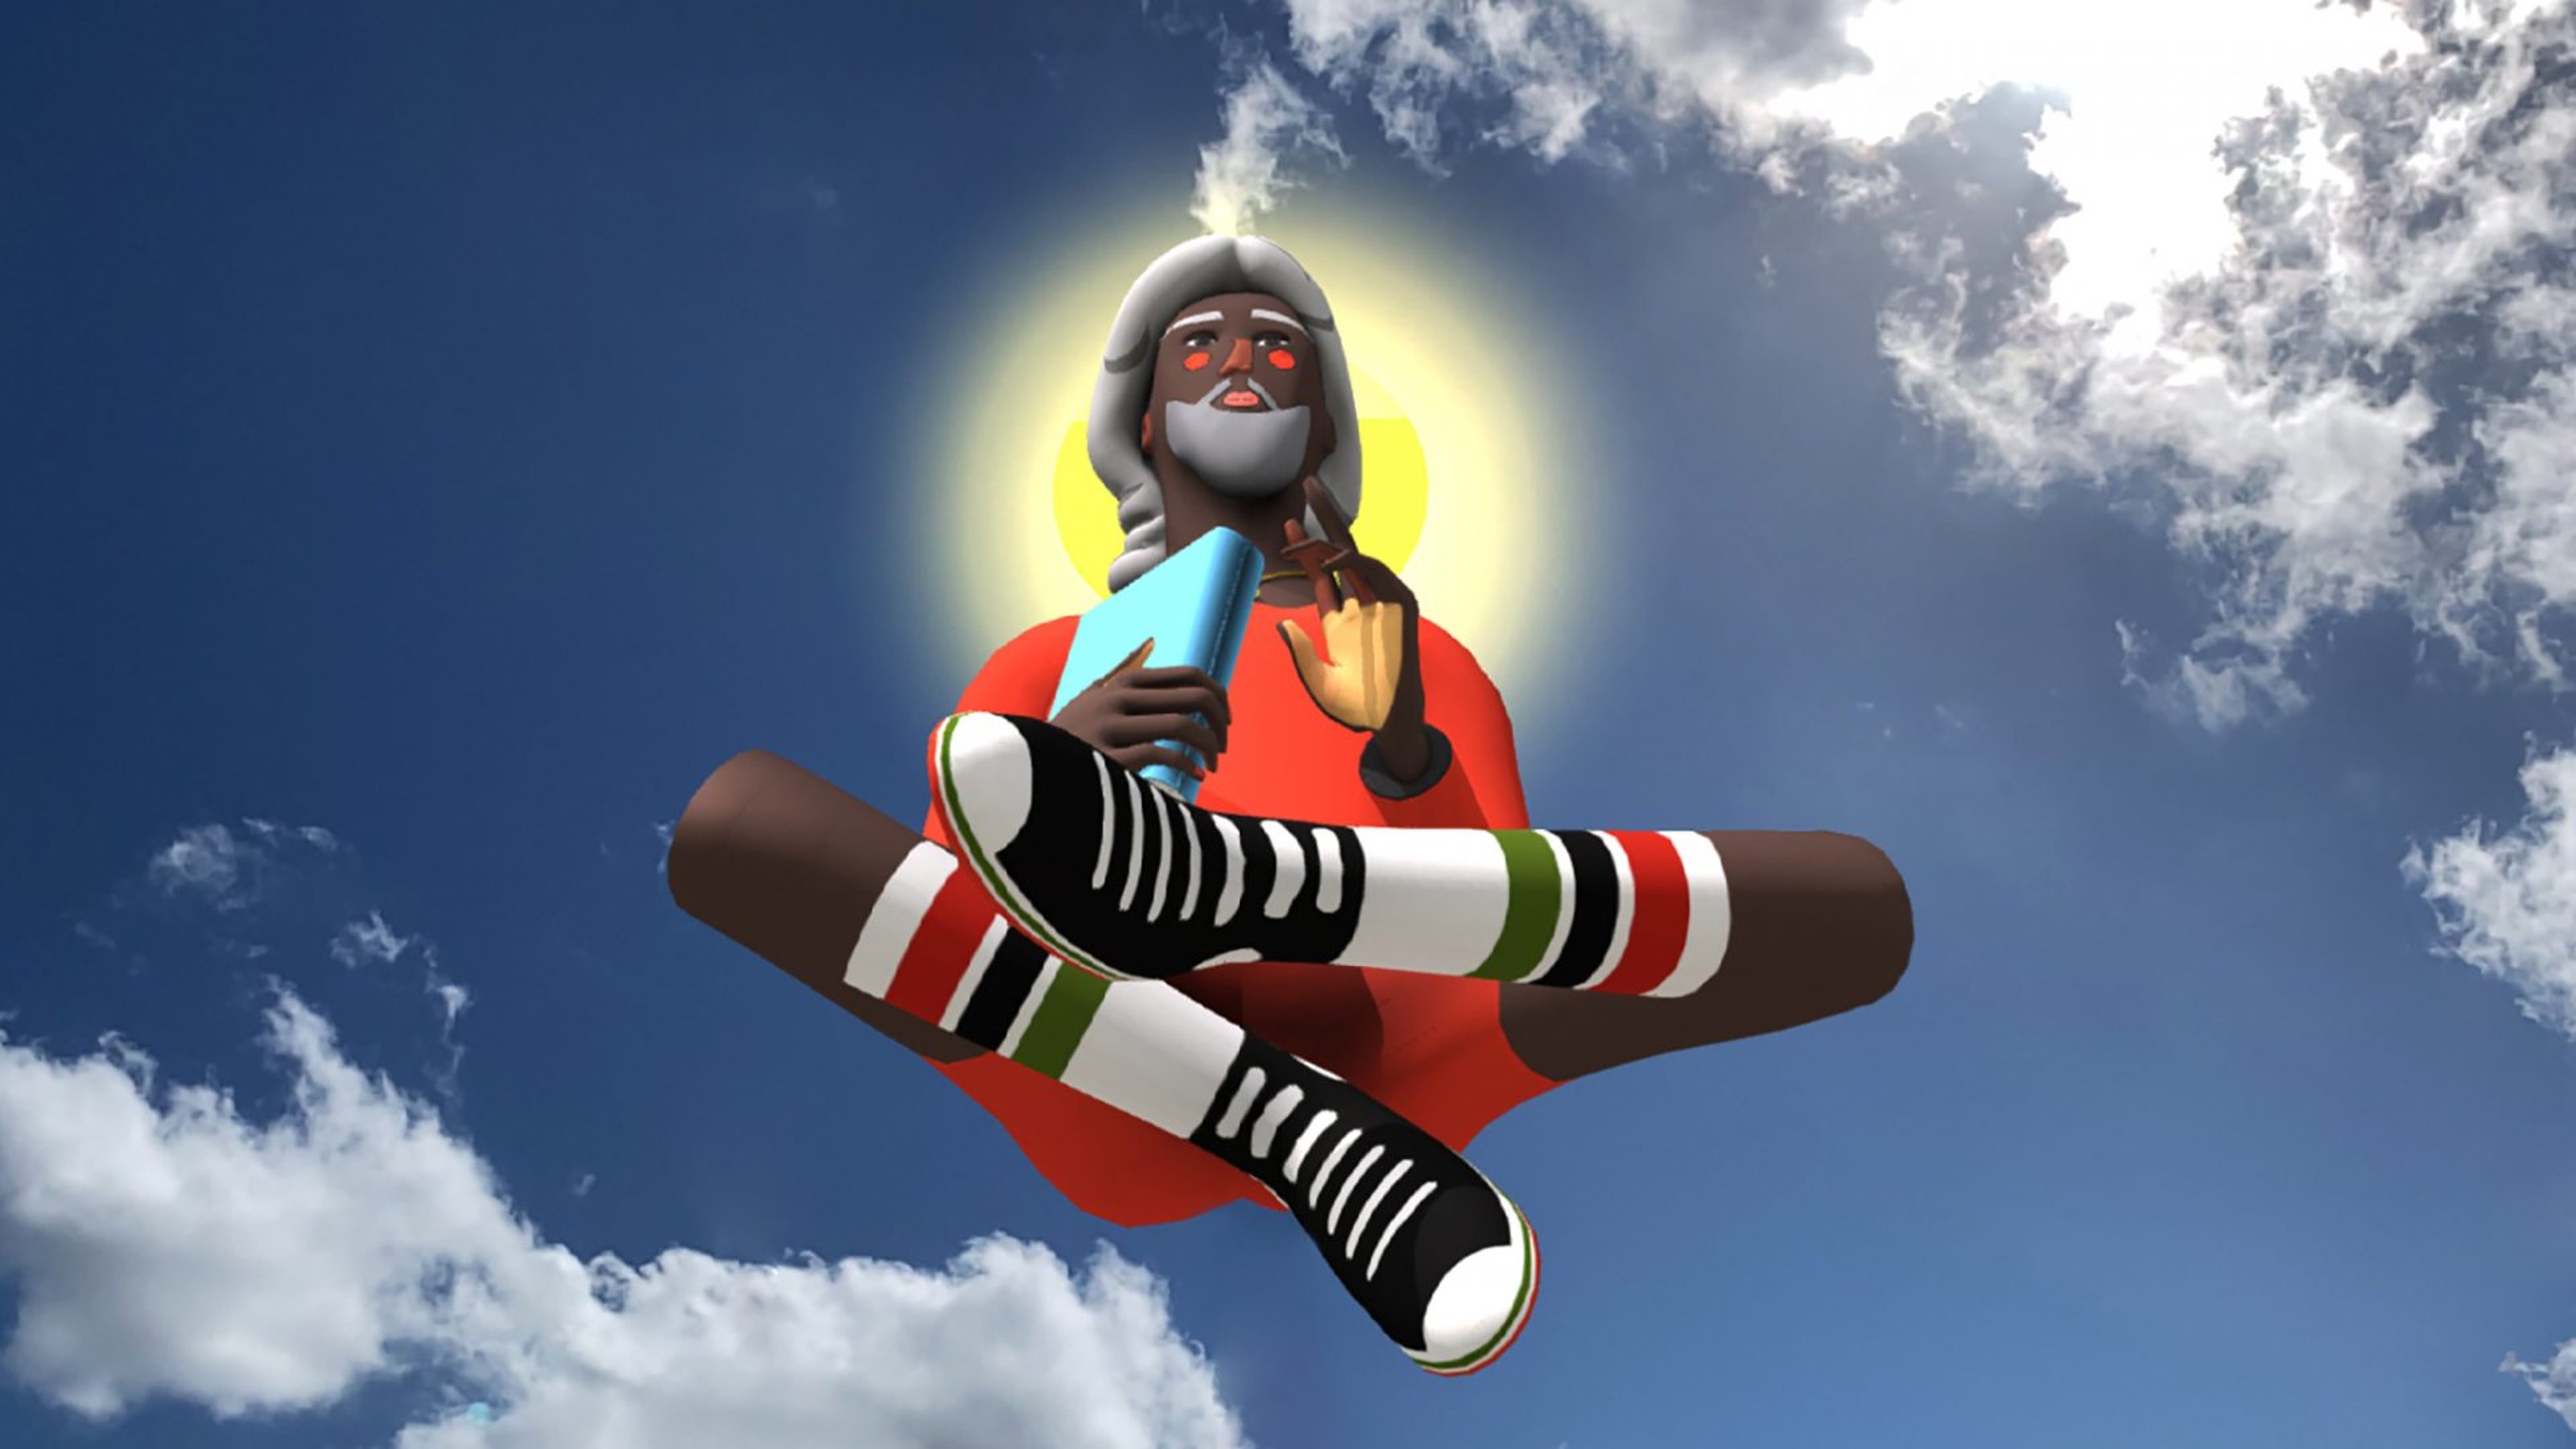 A black religious figure sitting in the mid-air with a hand in his book